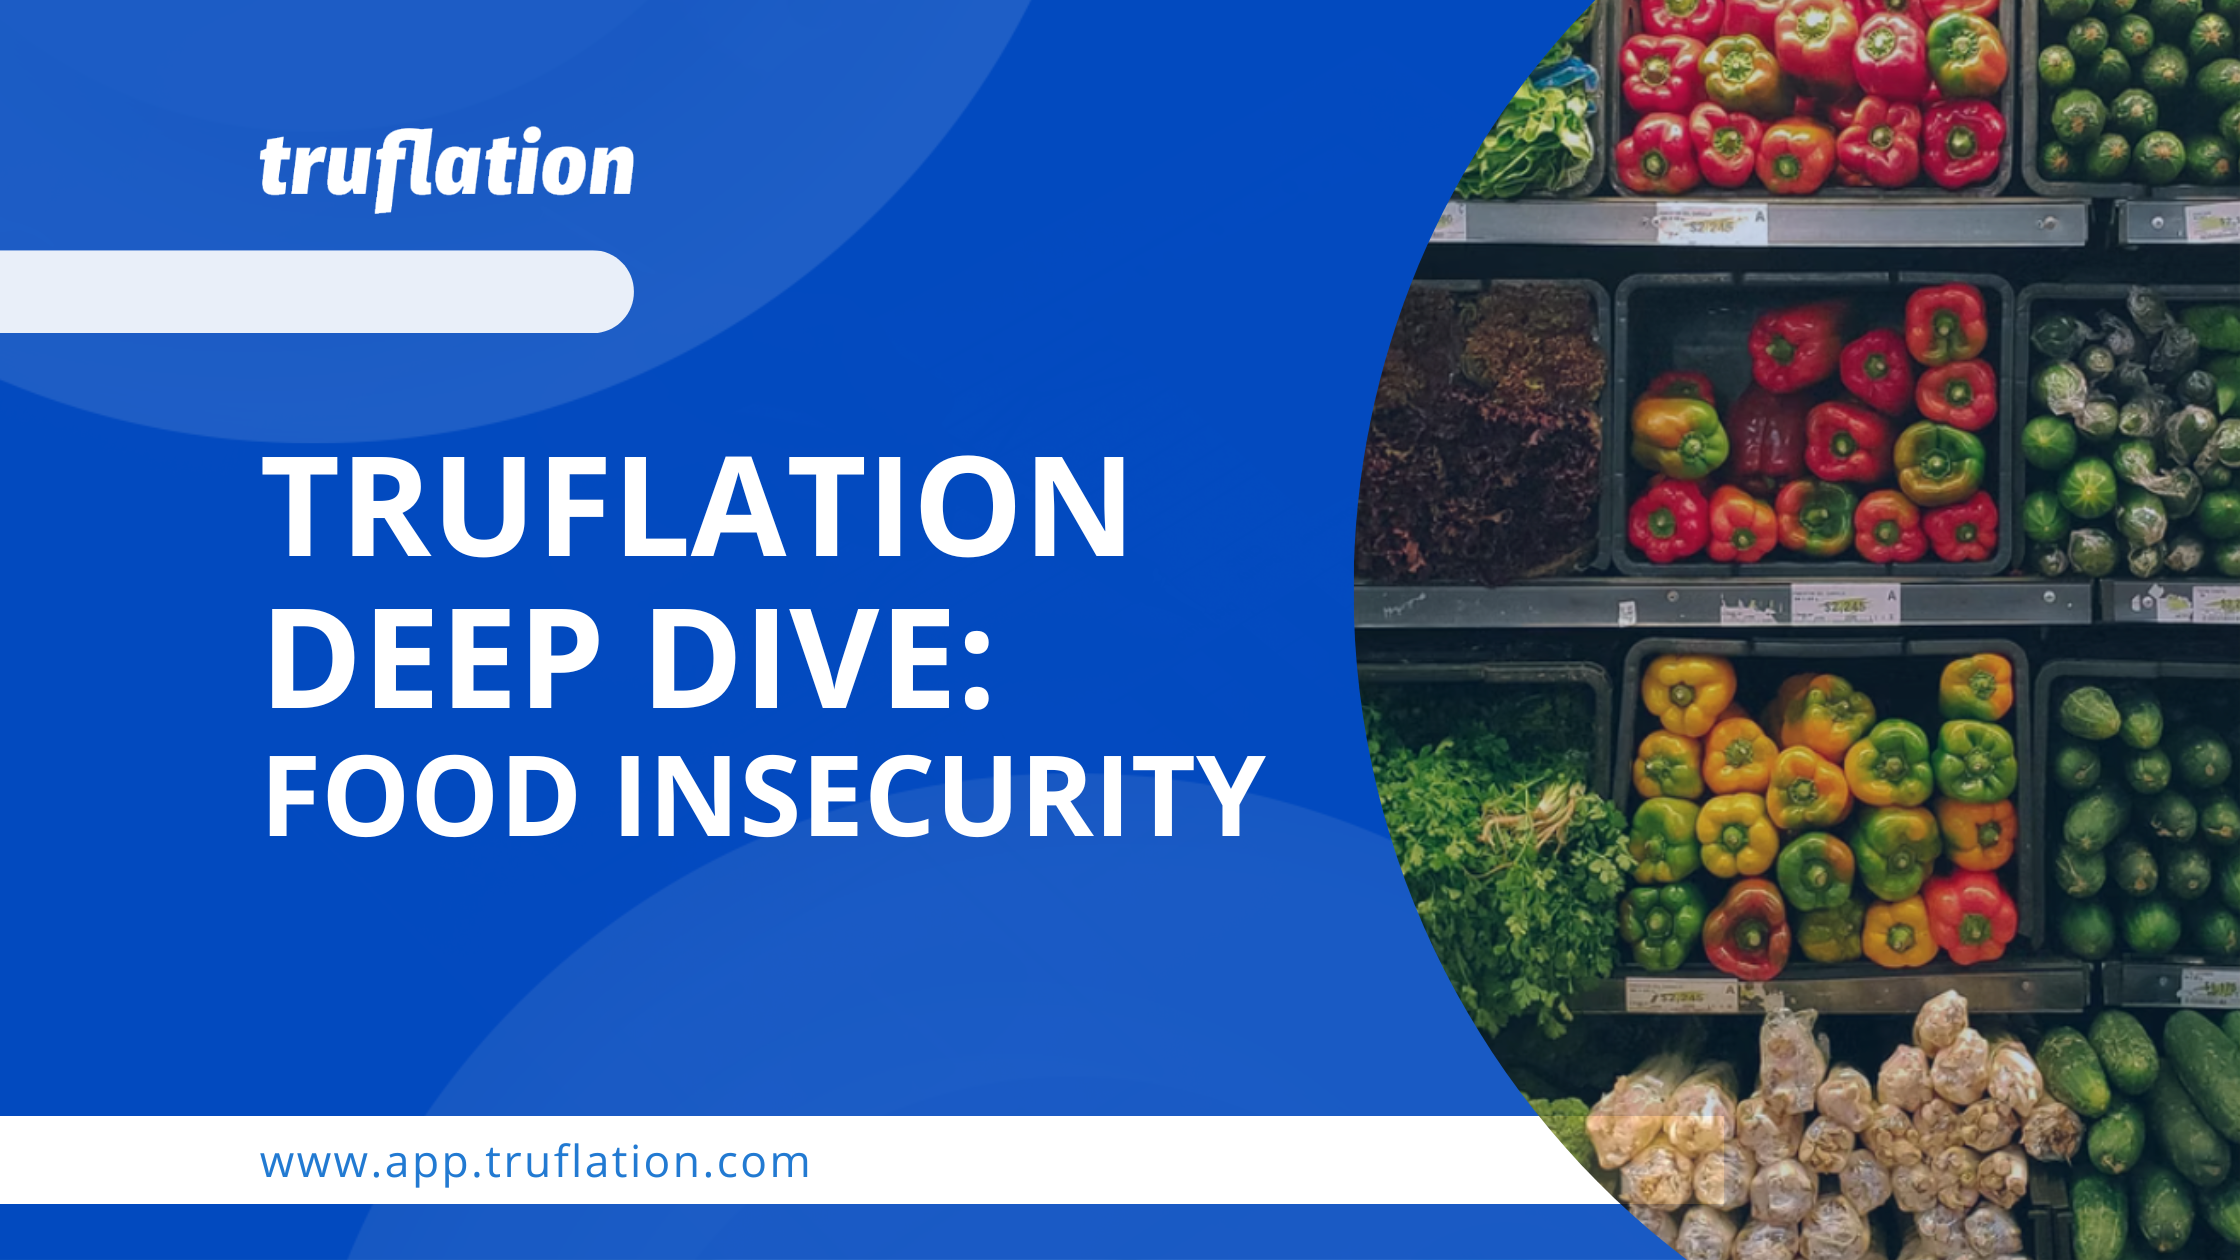 Truflation Deep Dive: Food insecurity